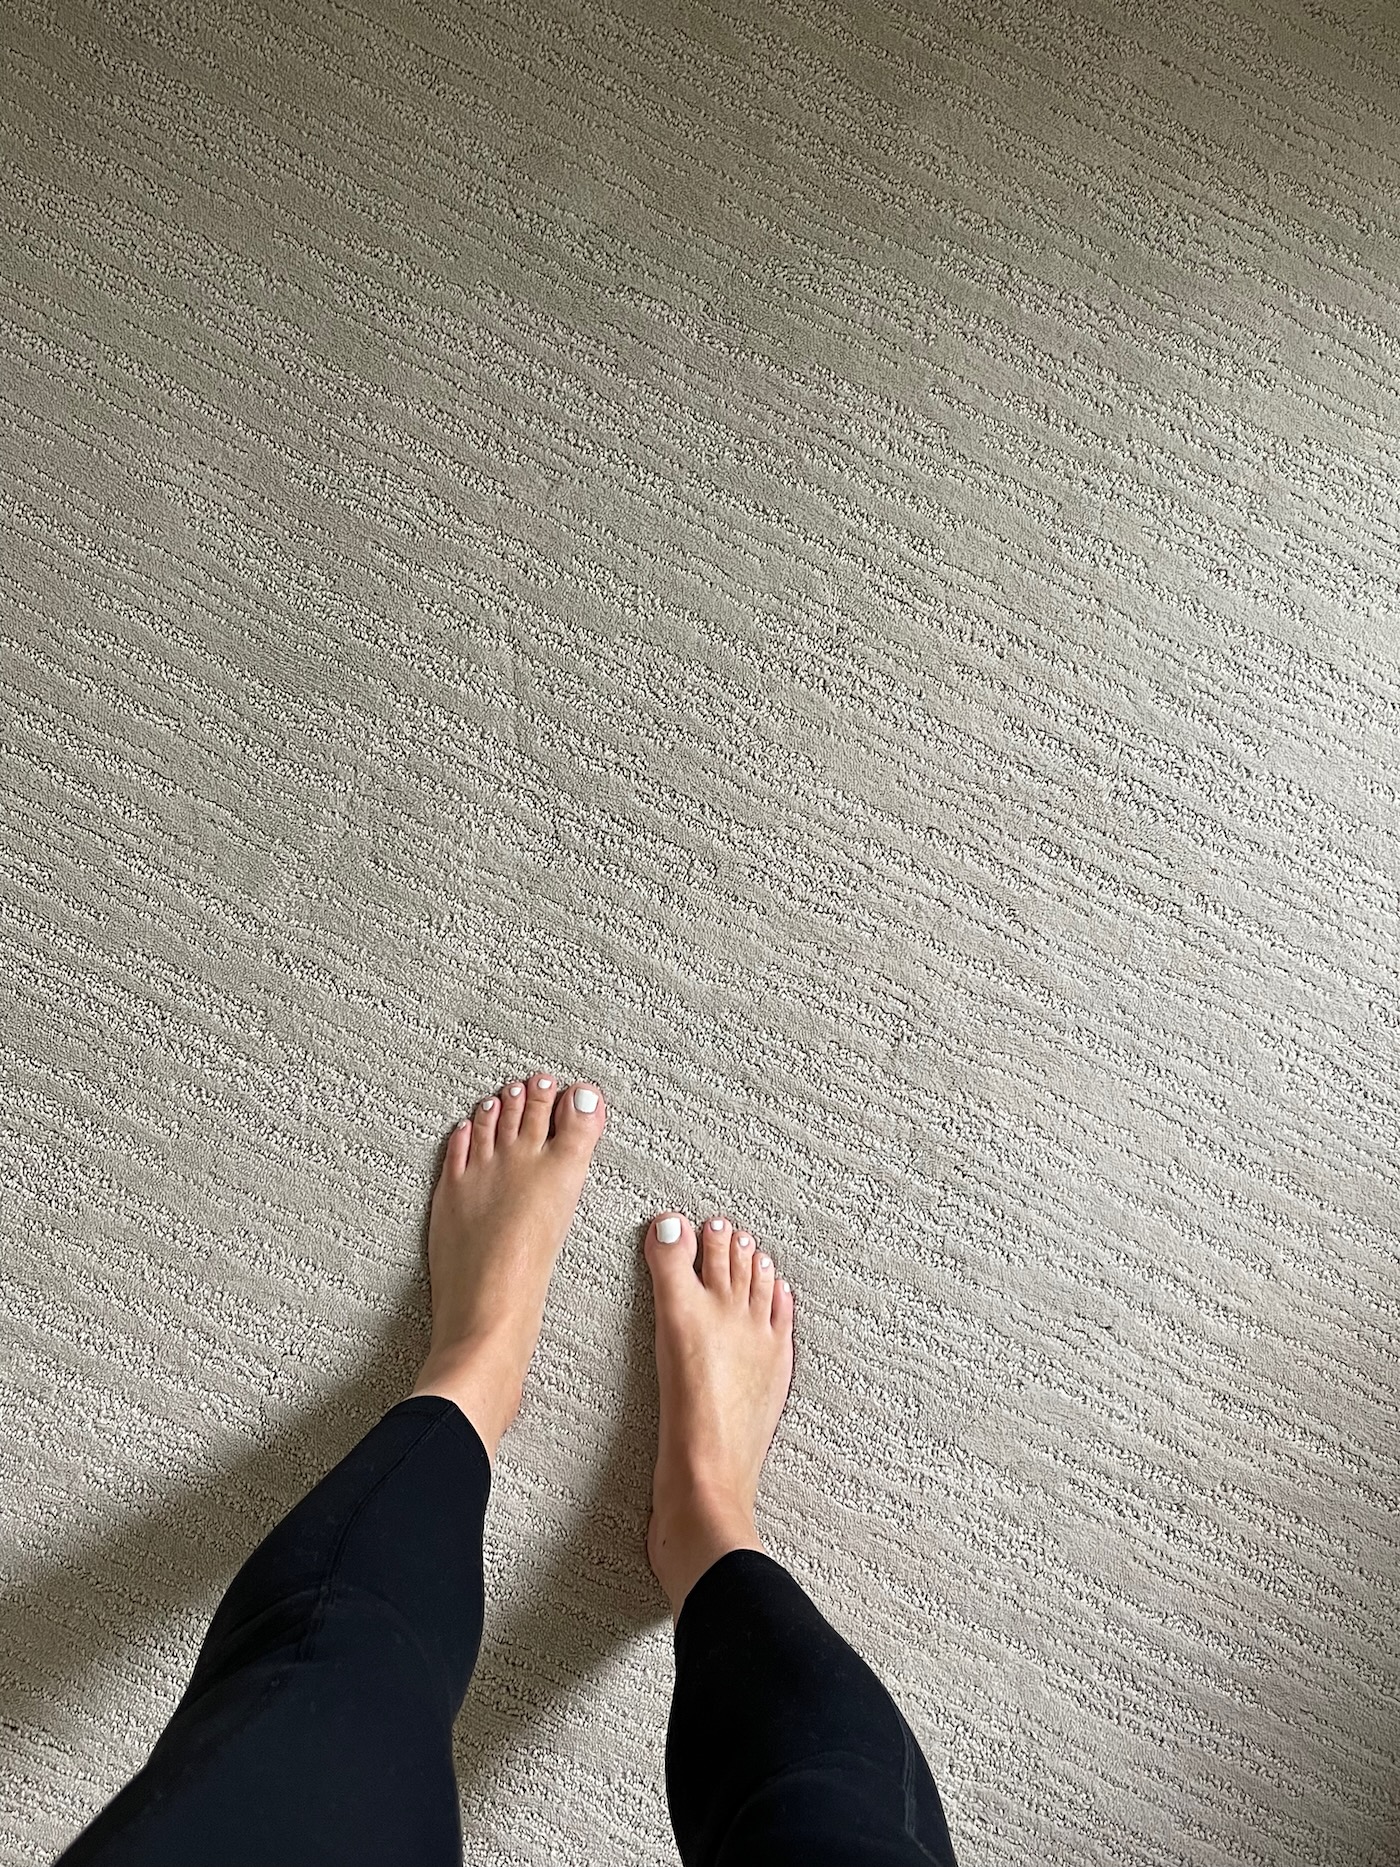 Low or High Pile Carpet: What's Right for Your Family?